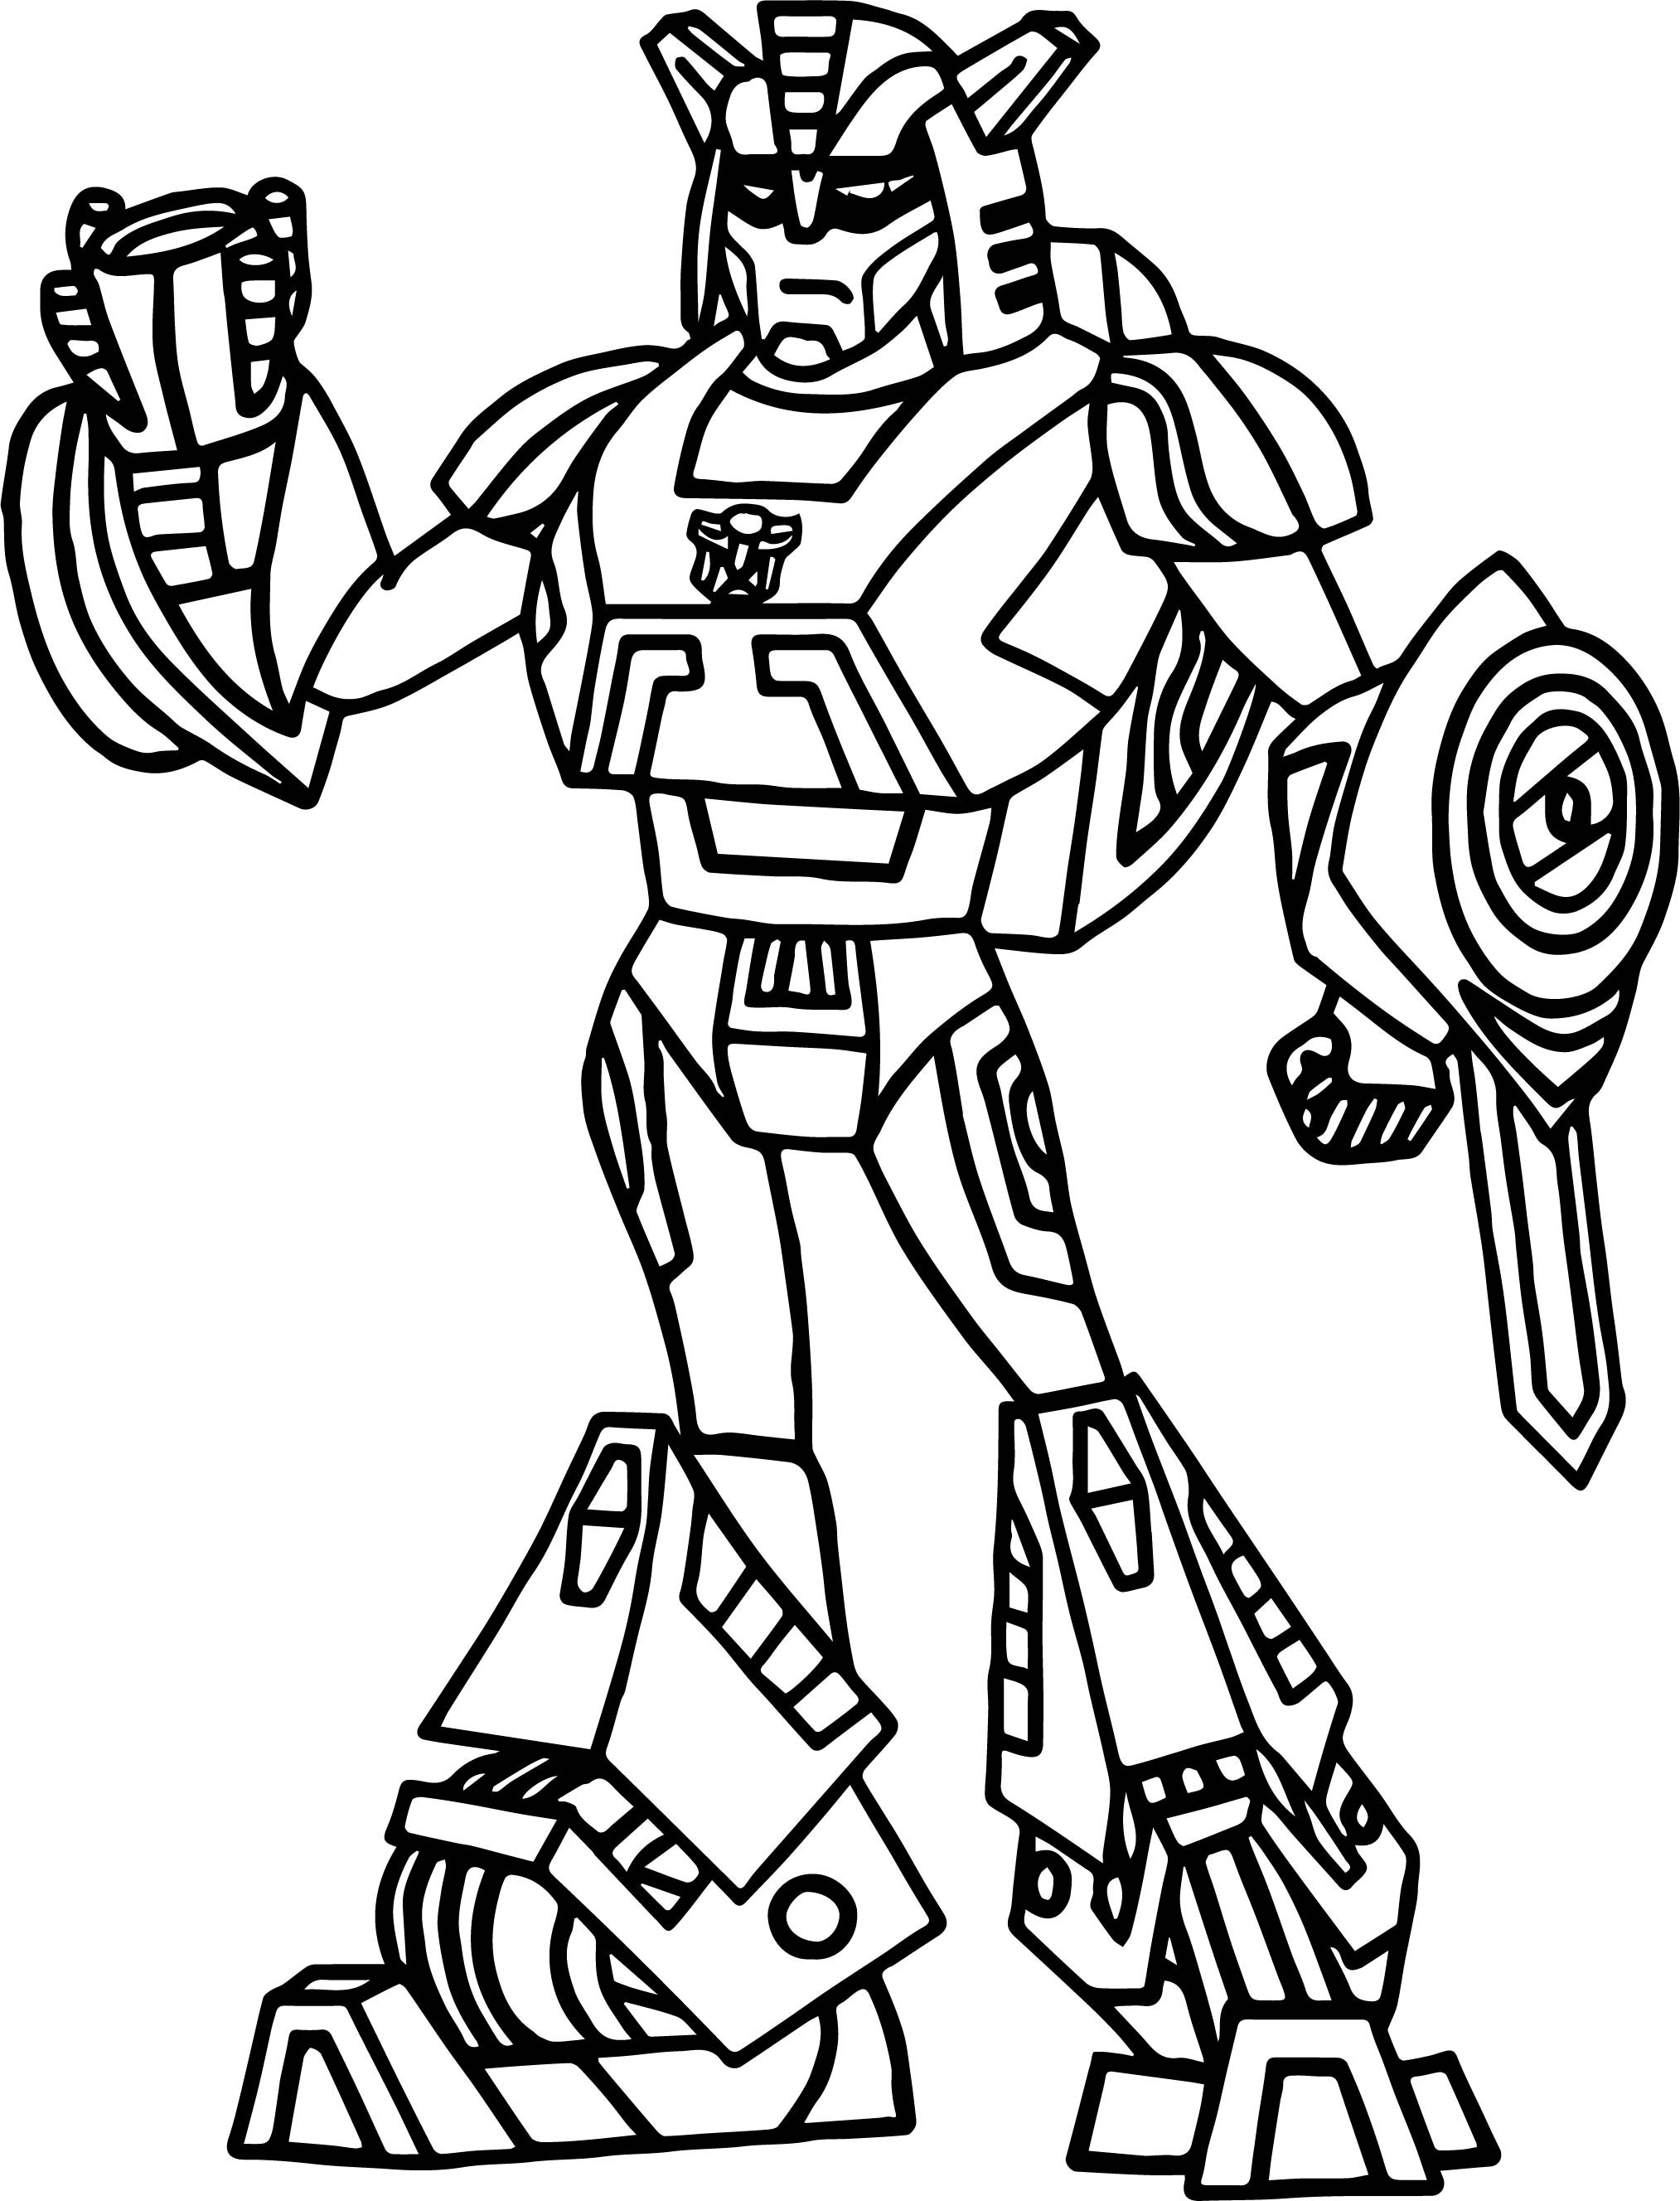 Transformers Coloring Pages For Boys
 Transformers Coloring Pages